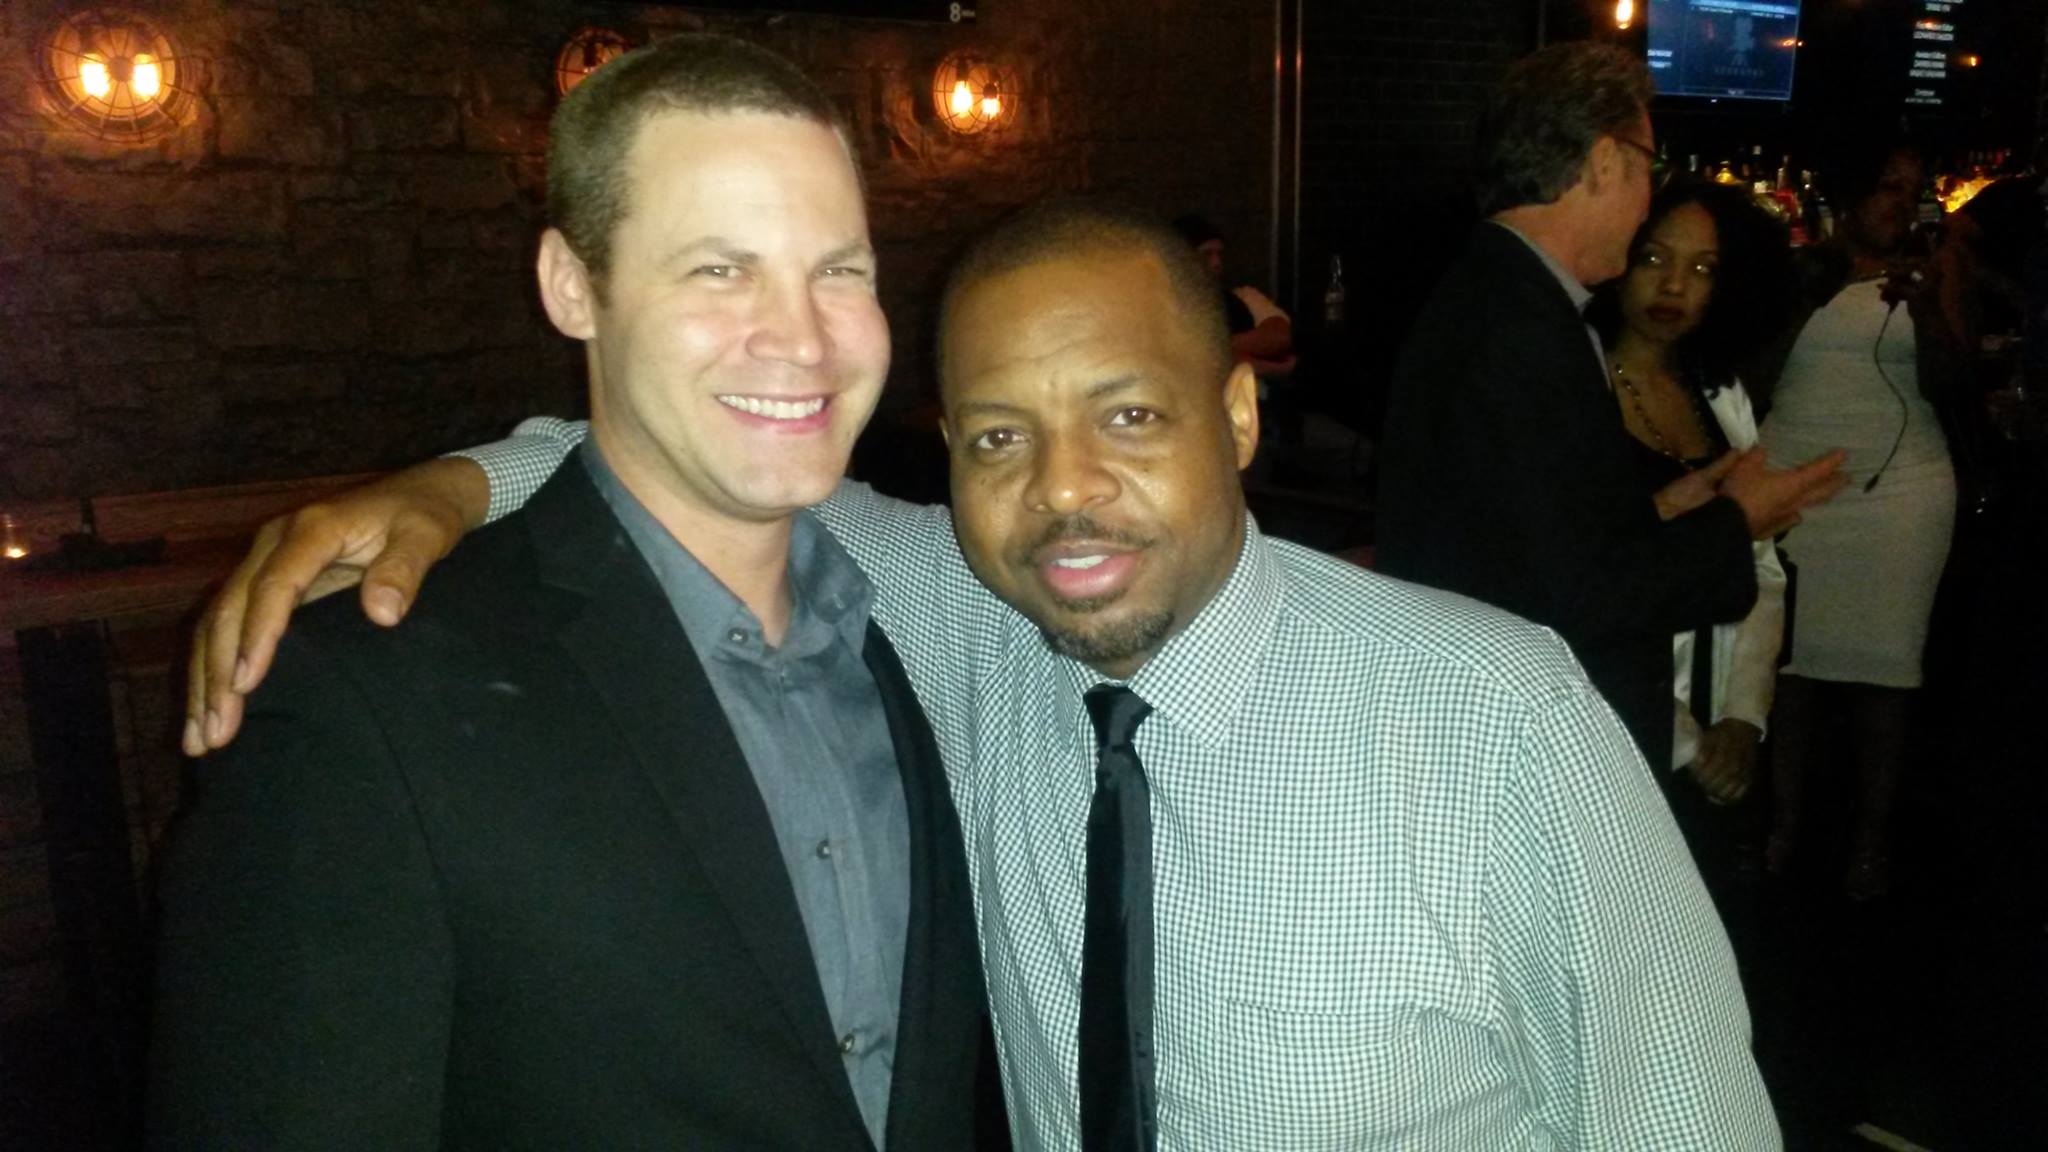 Jared Safier and Anthony Anderson at The Bay Pre Emmy Event